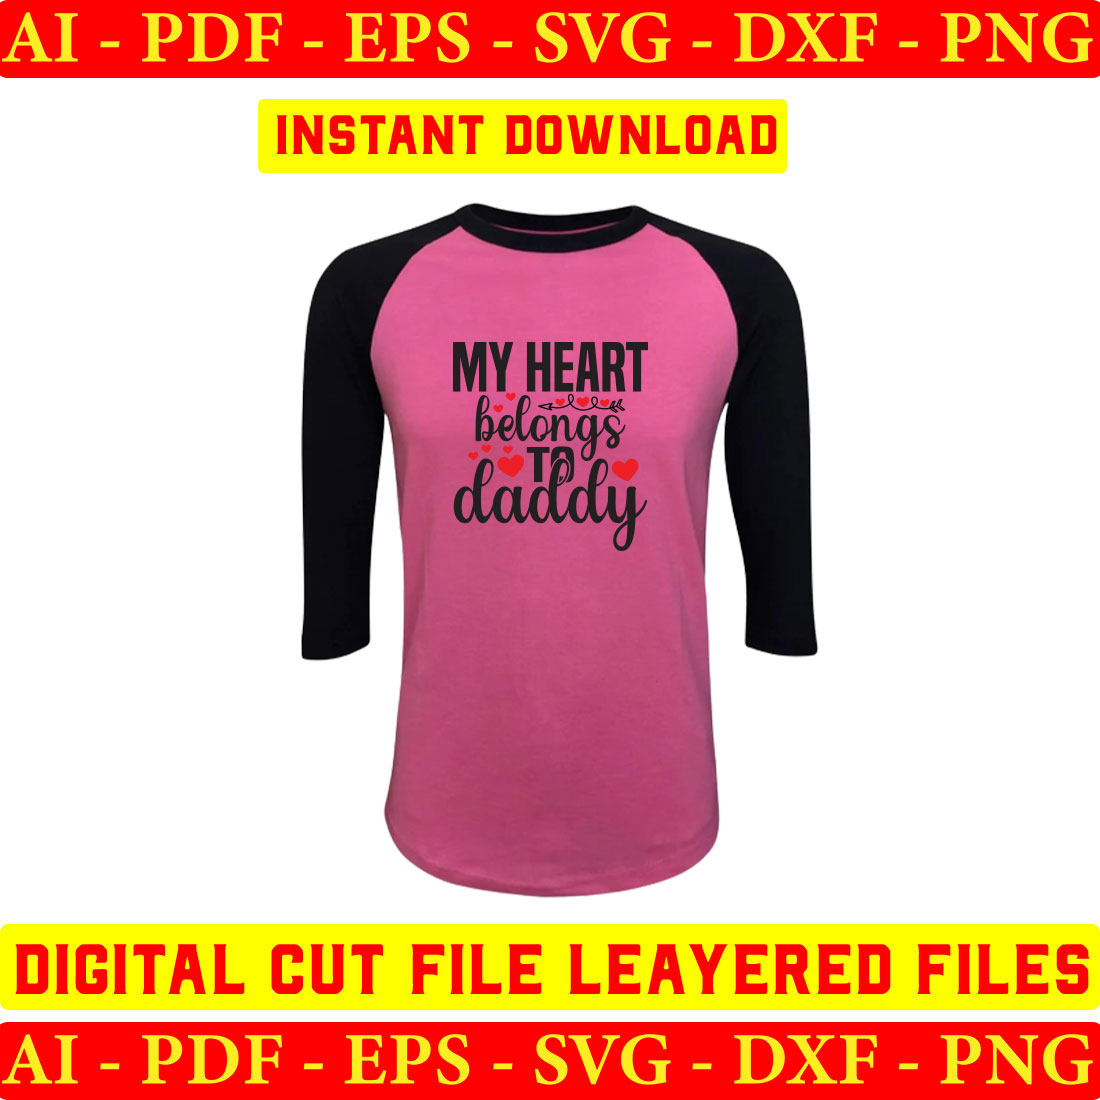 Pink and black shirt with the words my heart belongs daddy on it.